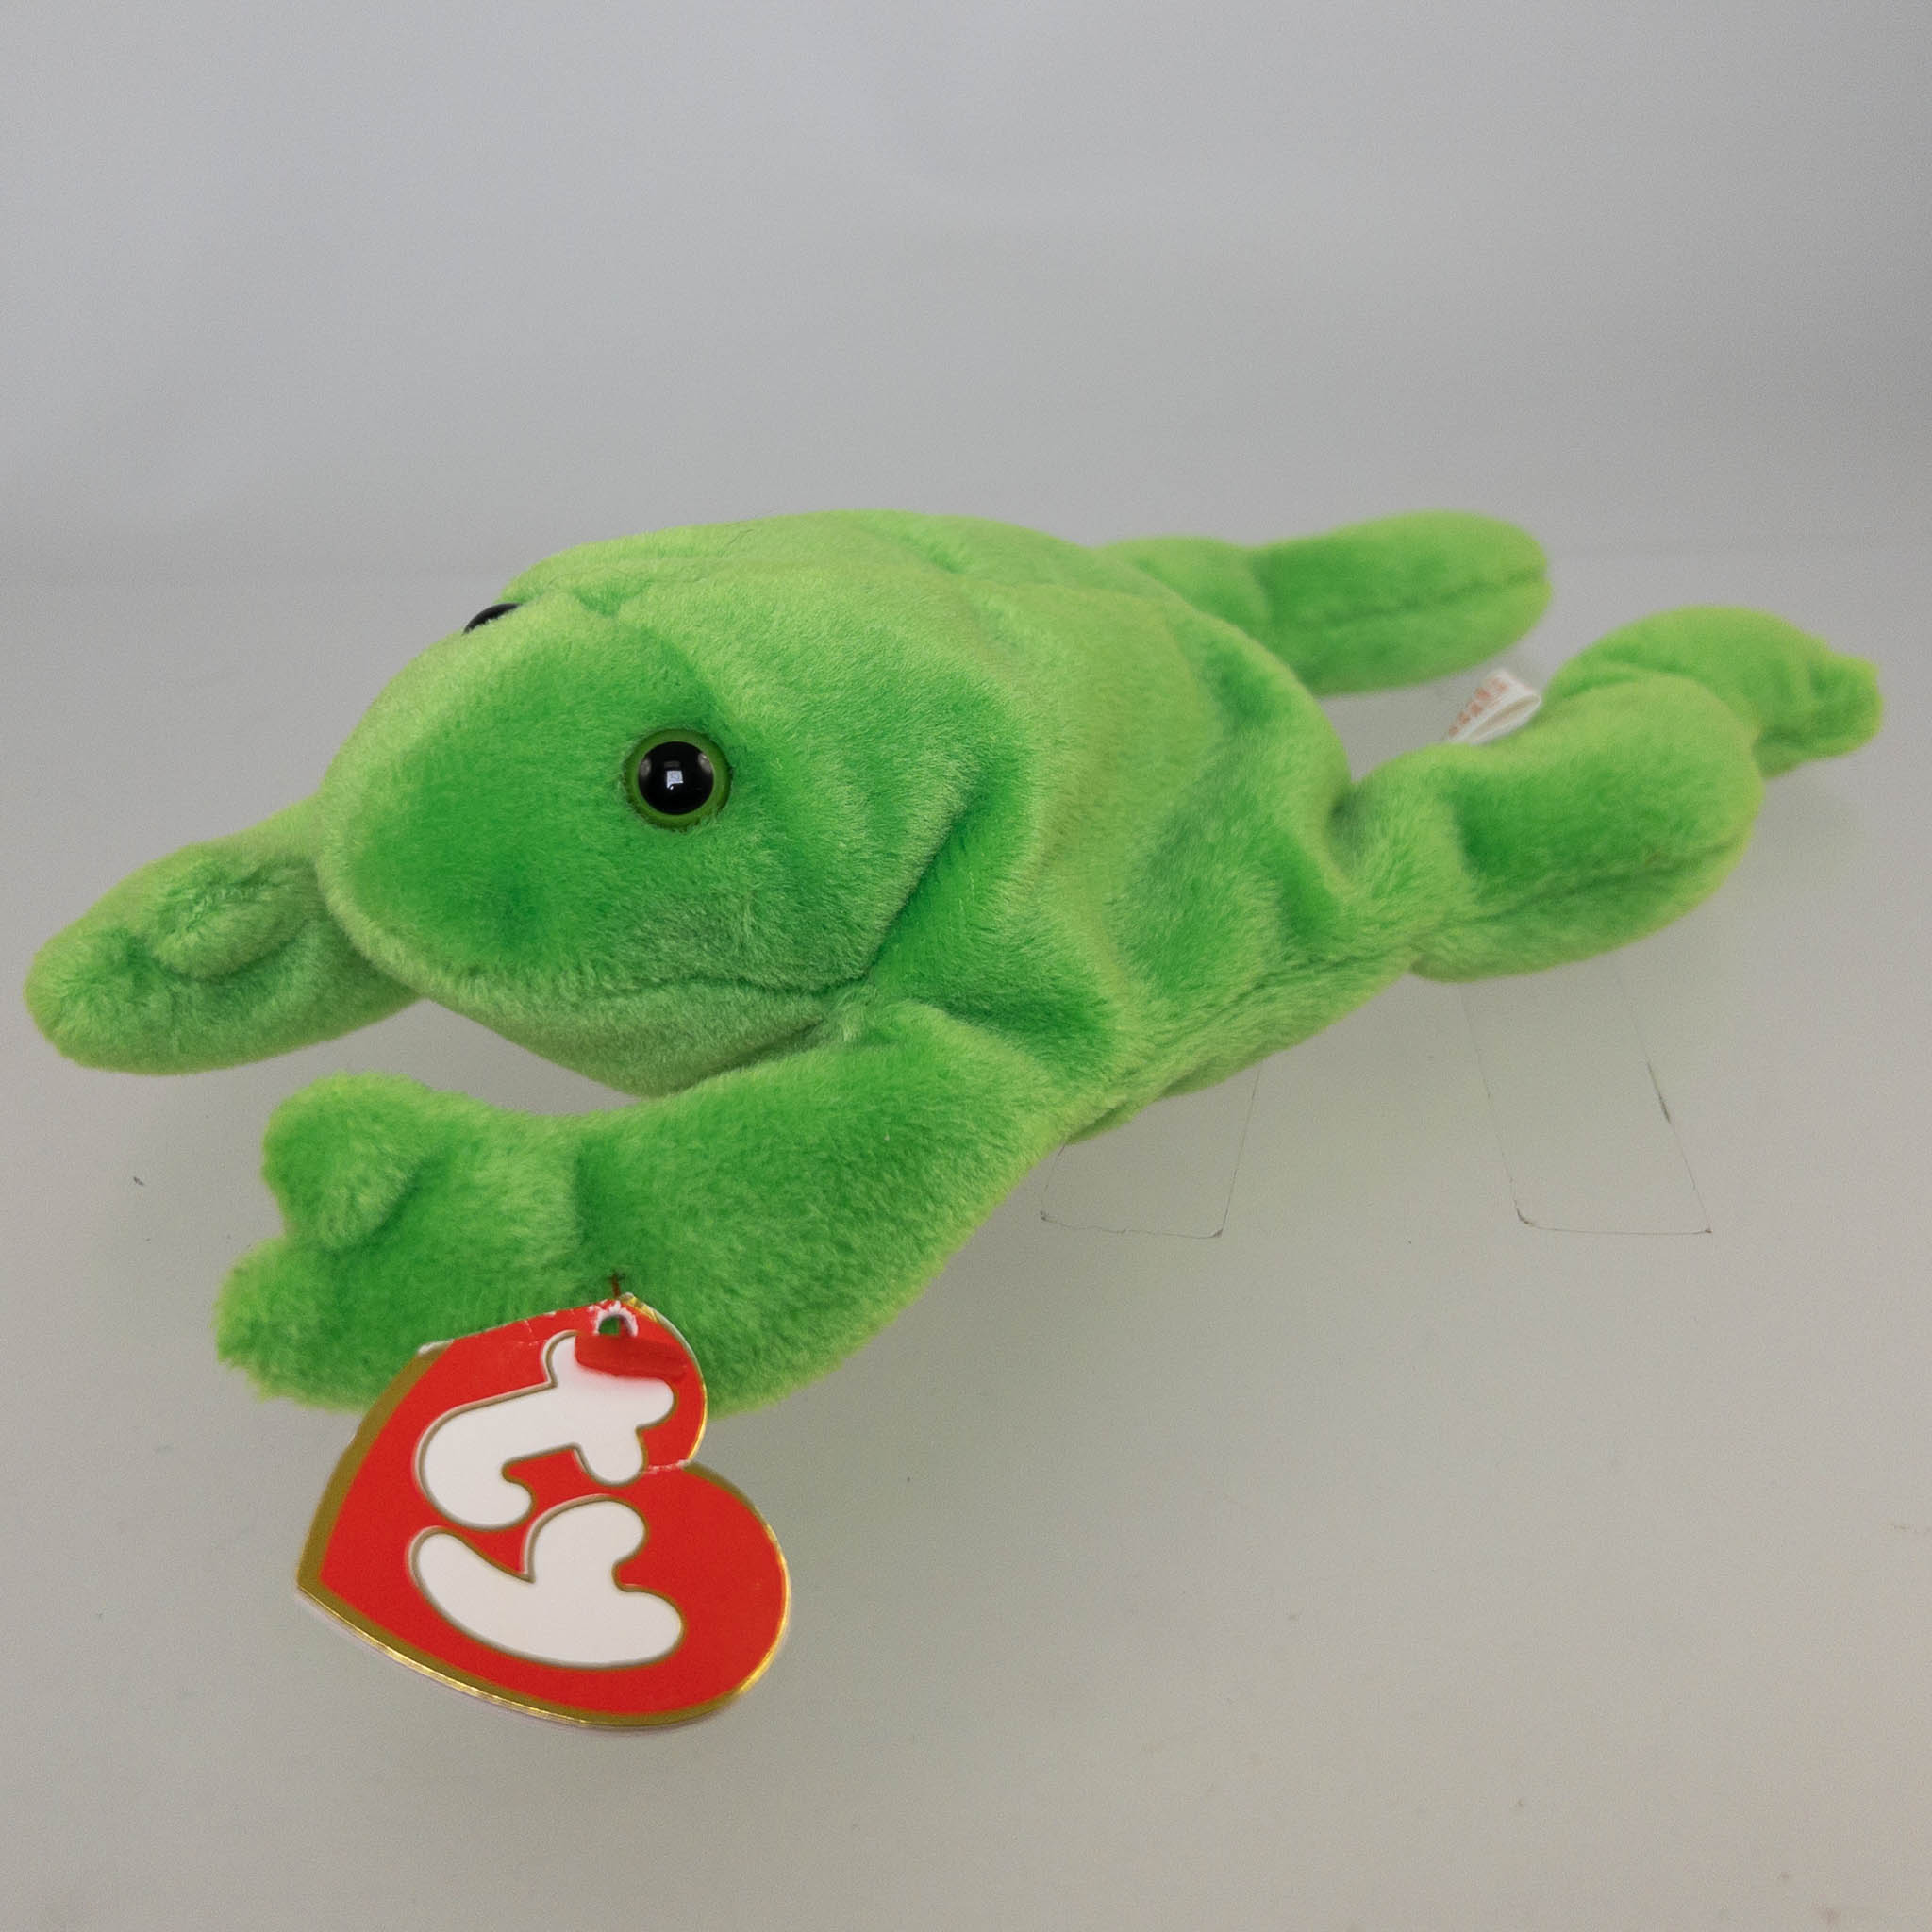 TY Beanie Baby - LEGS the Frog (3rd Gen Hang Tag - MWCTs)